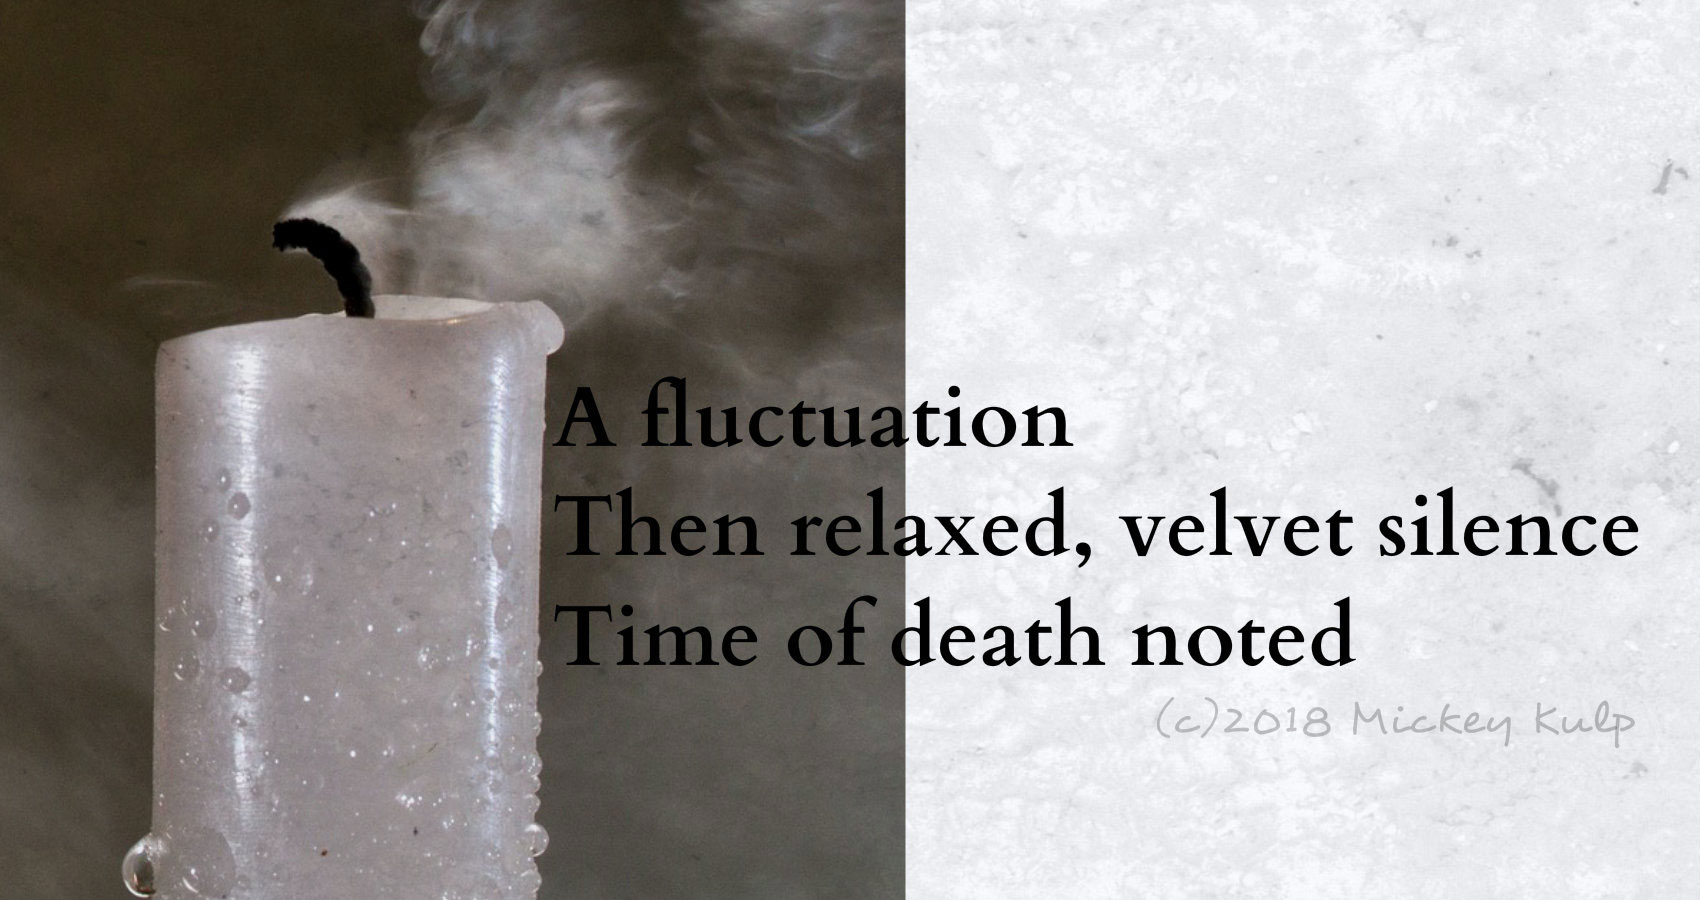 Fluctuation written by Mickey Kulp at Spillwords.com